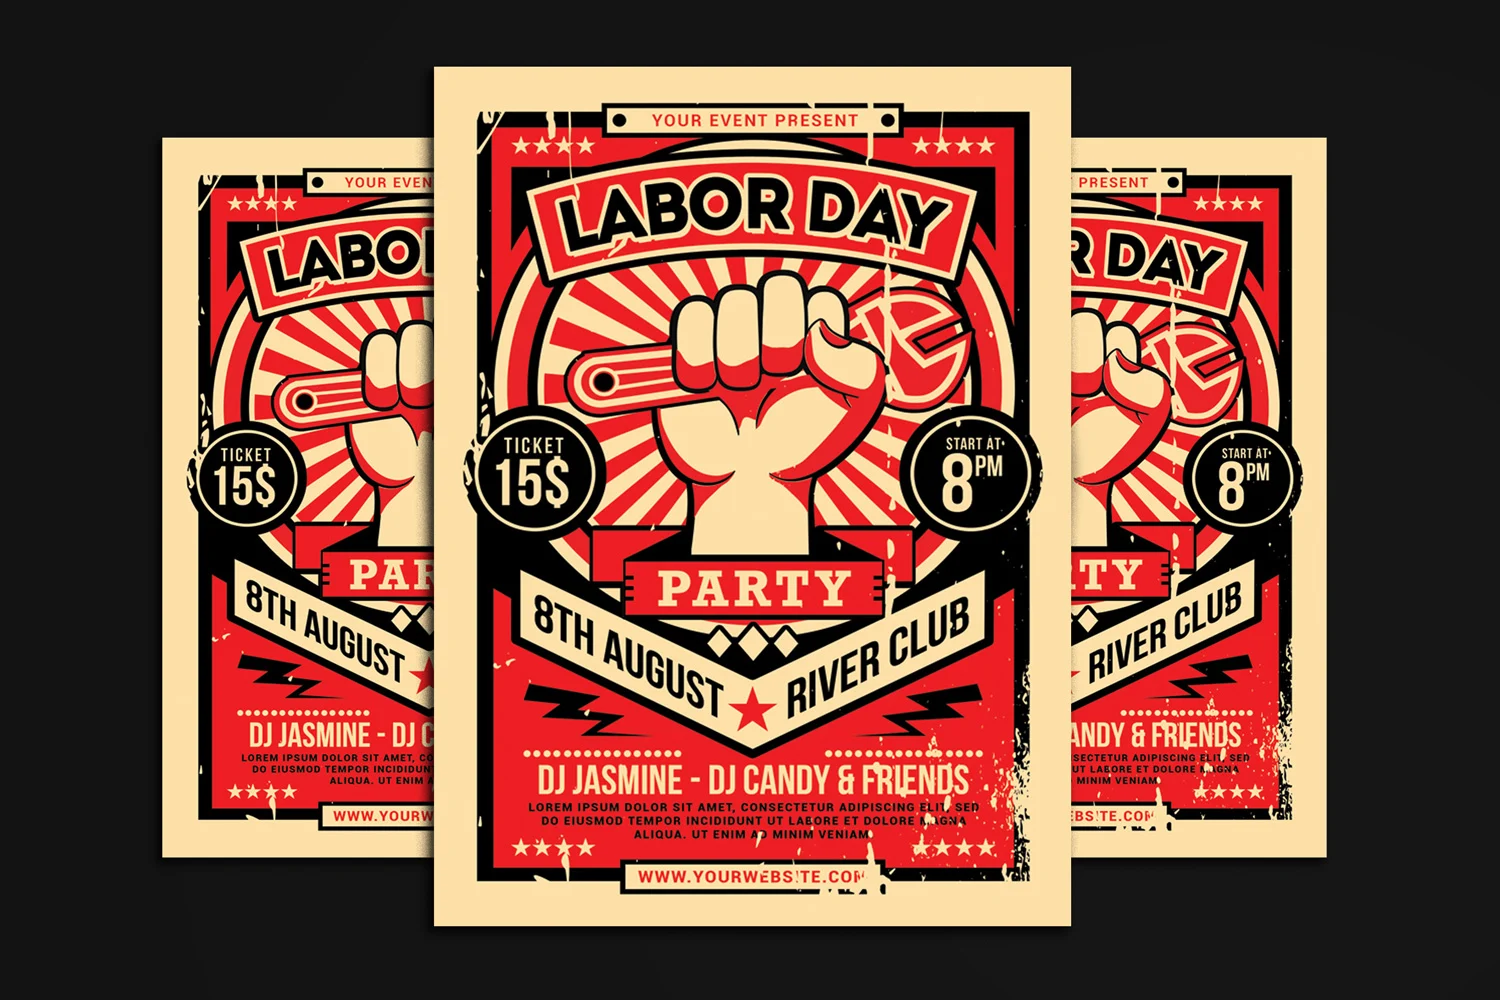 3 cool mockups of labor day flyer on a black background.